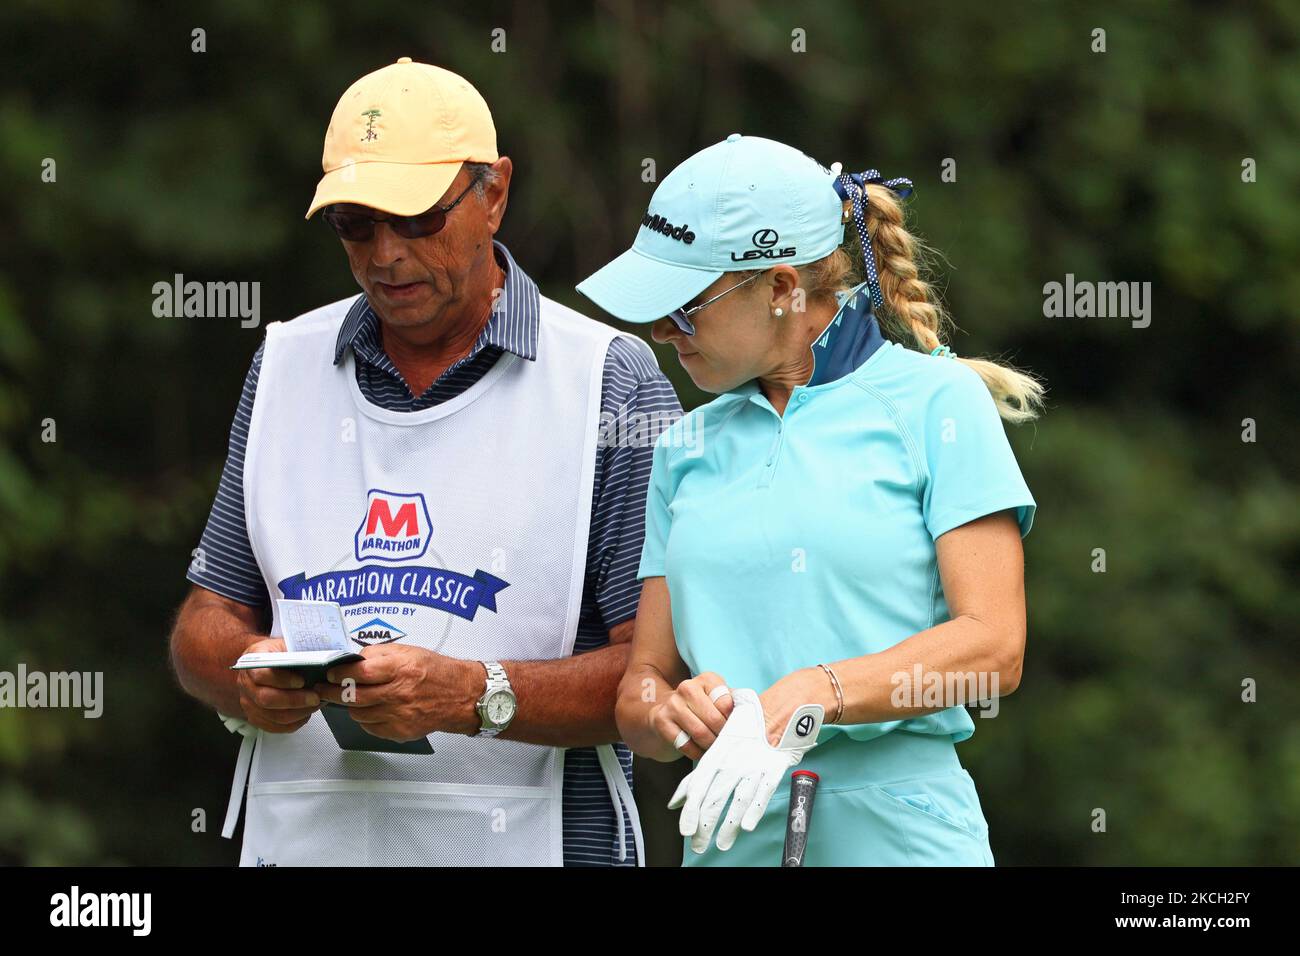 Natalie Gulbis of Lake Las Vegas, Virginia talks with her caddy before hitting from the 11th tee during the second round of the Marathon LPGA Classic golf tournament at Highland Meadows Golf Club in Sylvania, Ohio, USA Friday, July 9, 2021. (Photo by Amy Lemus/NurPhoto) Stock Photo